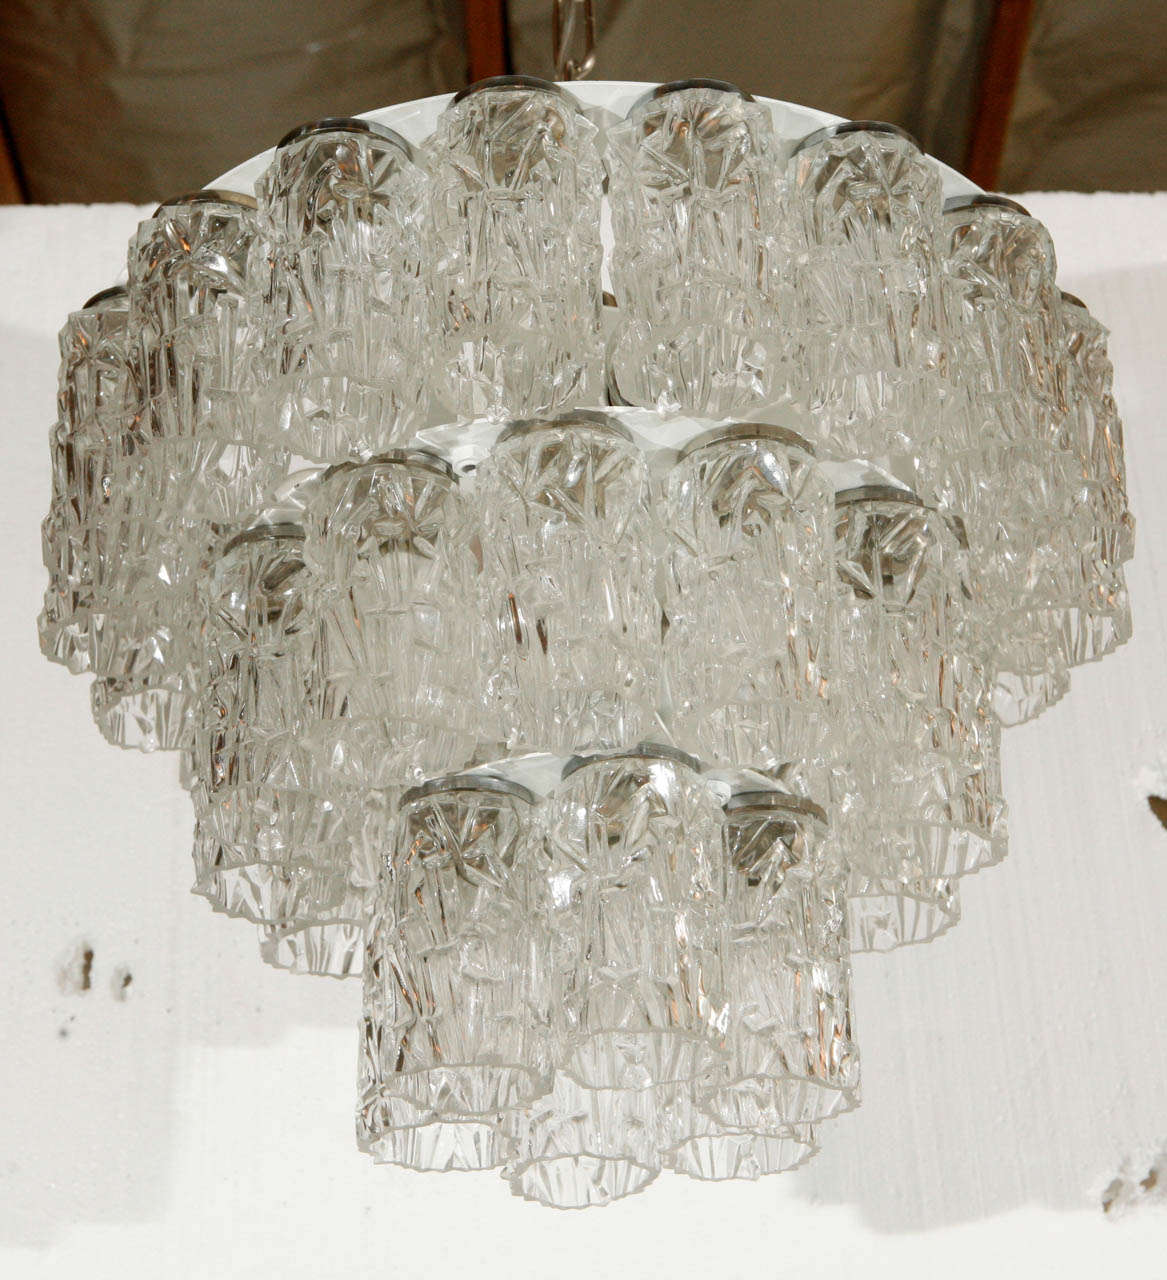 Mazzega three-tier opalescent chandelier.
Visit the Paul Marra storefront to see more lighting including 21st Century.